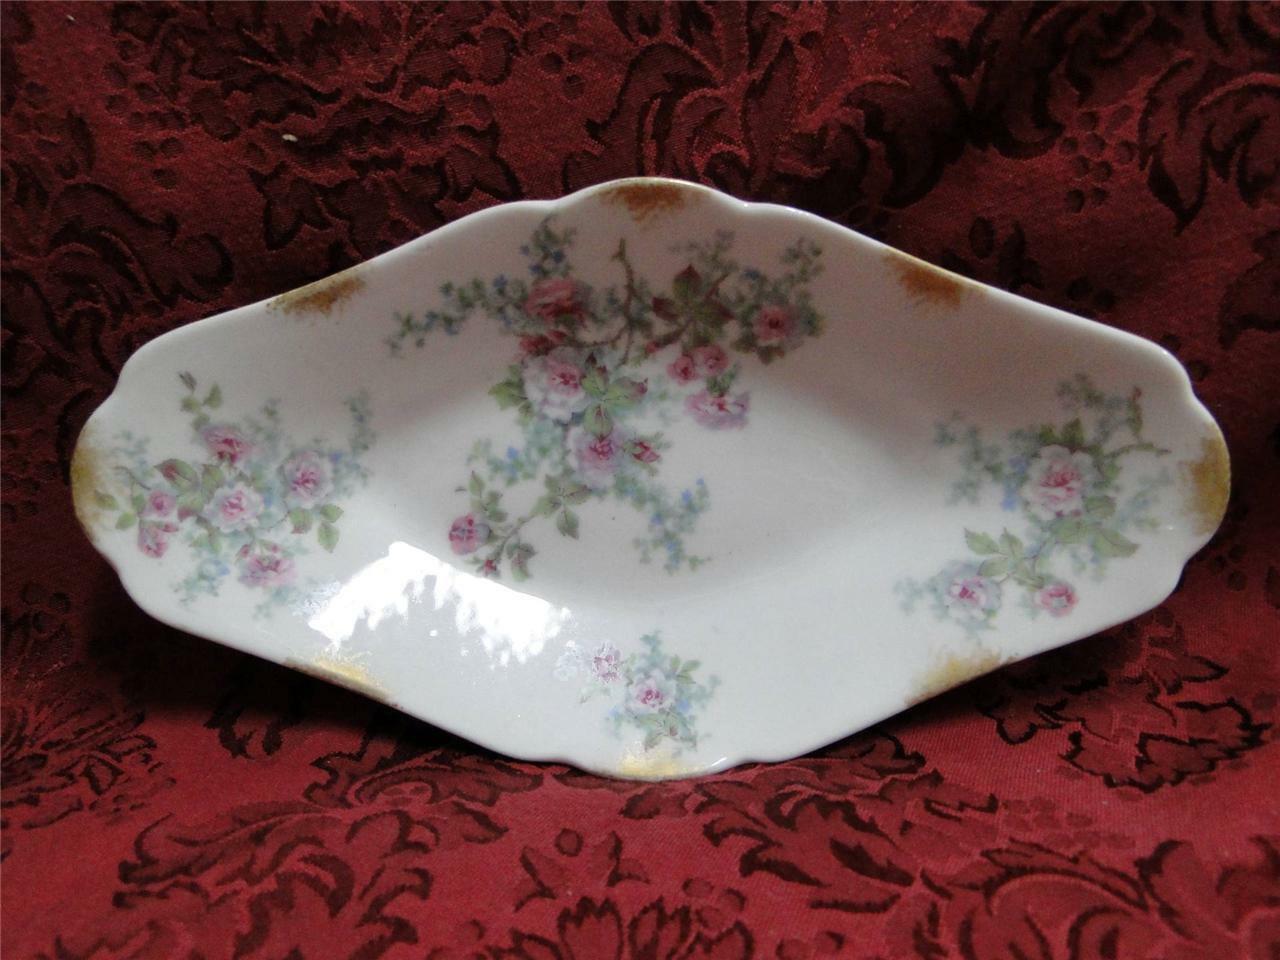 Wm Guerin, Limoges, Pink Roses, Blue, Green: Relish Dish, 9 1/2" x 5"